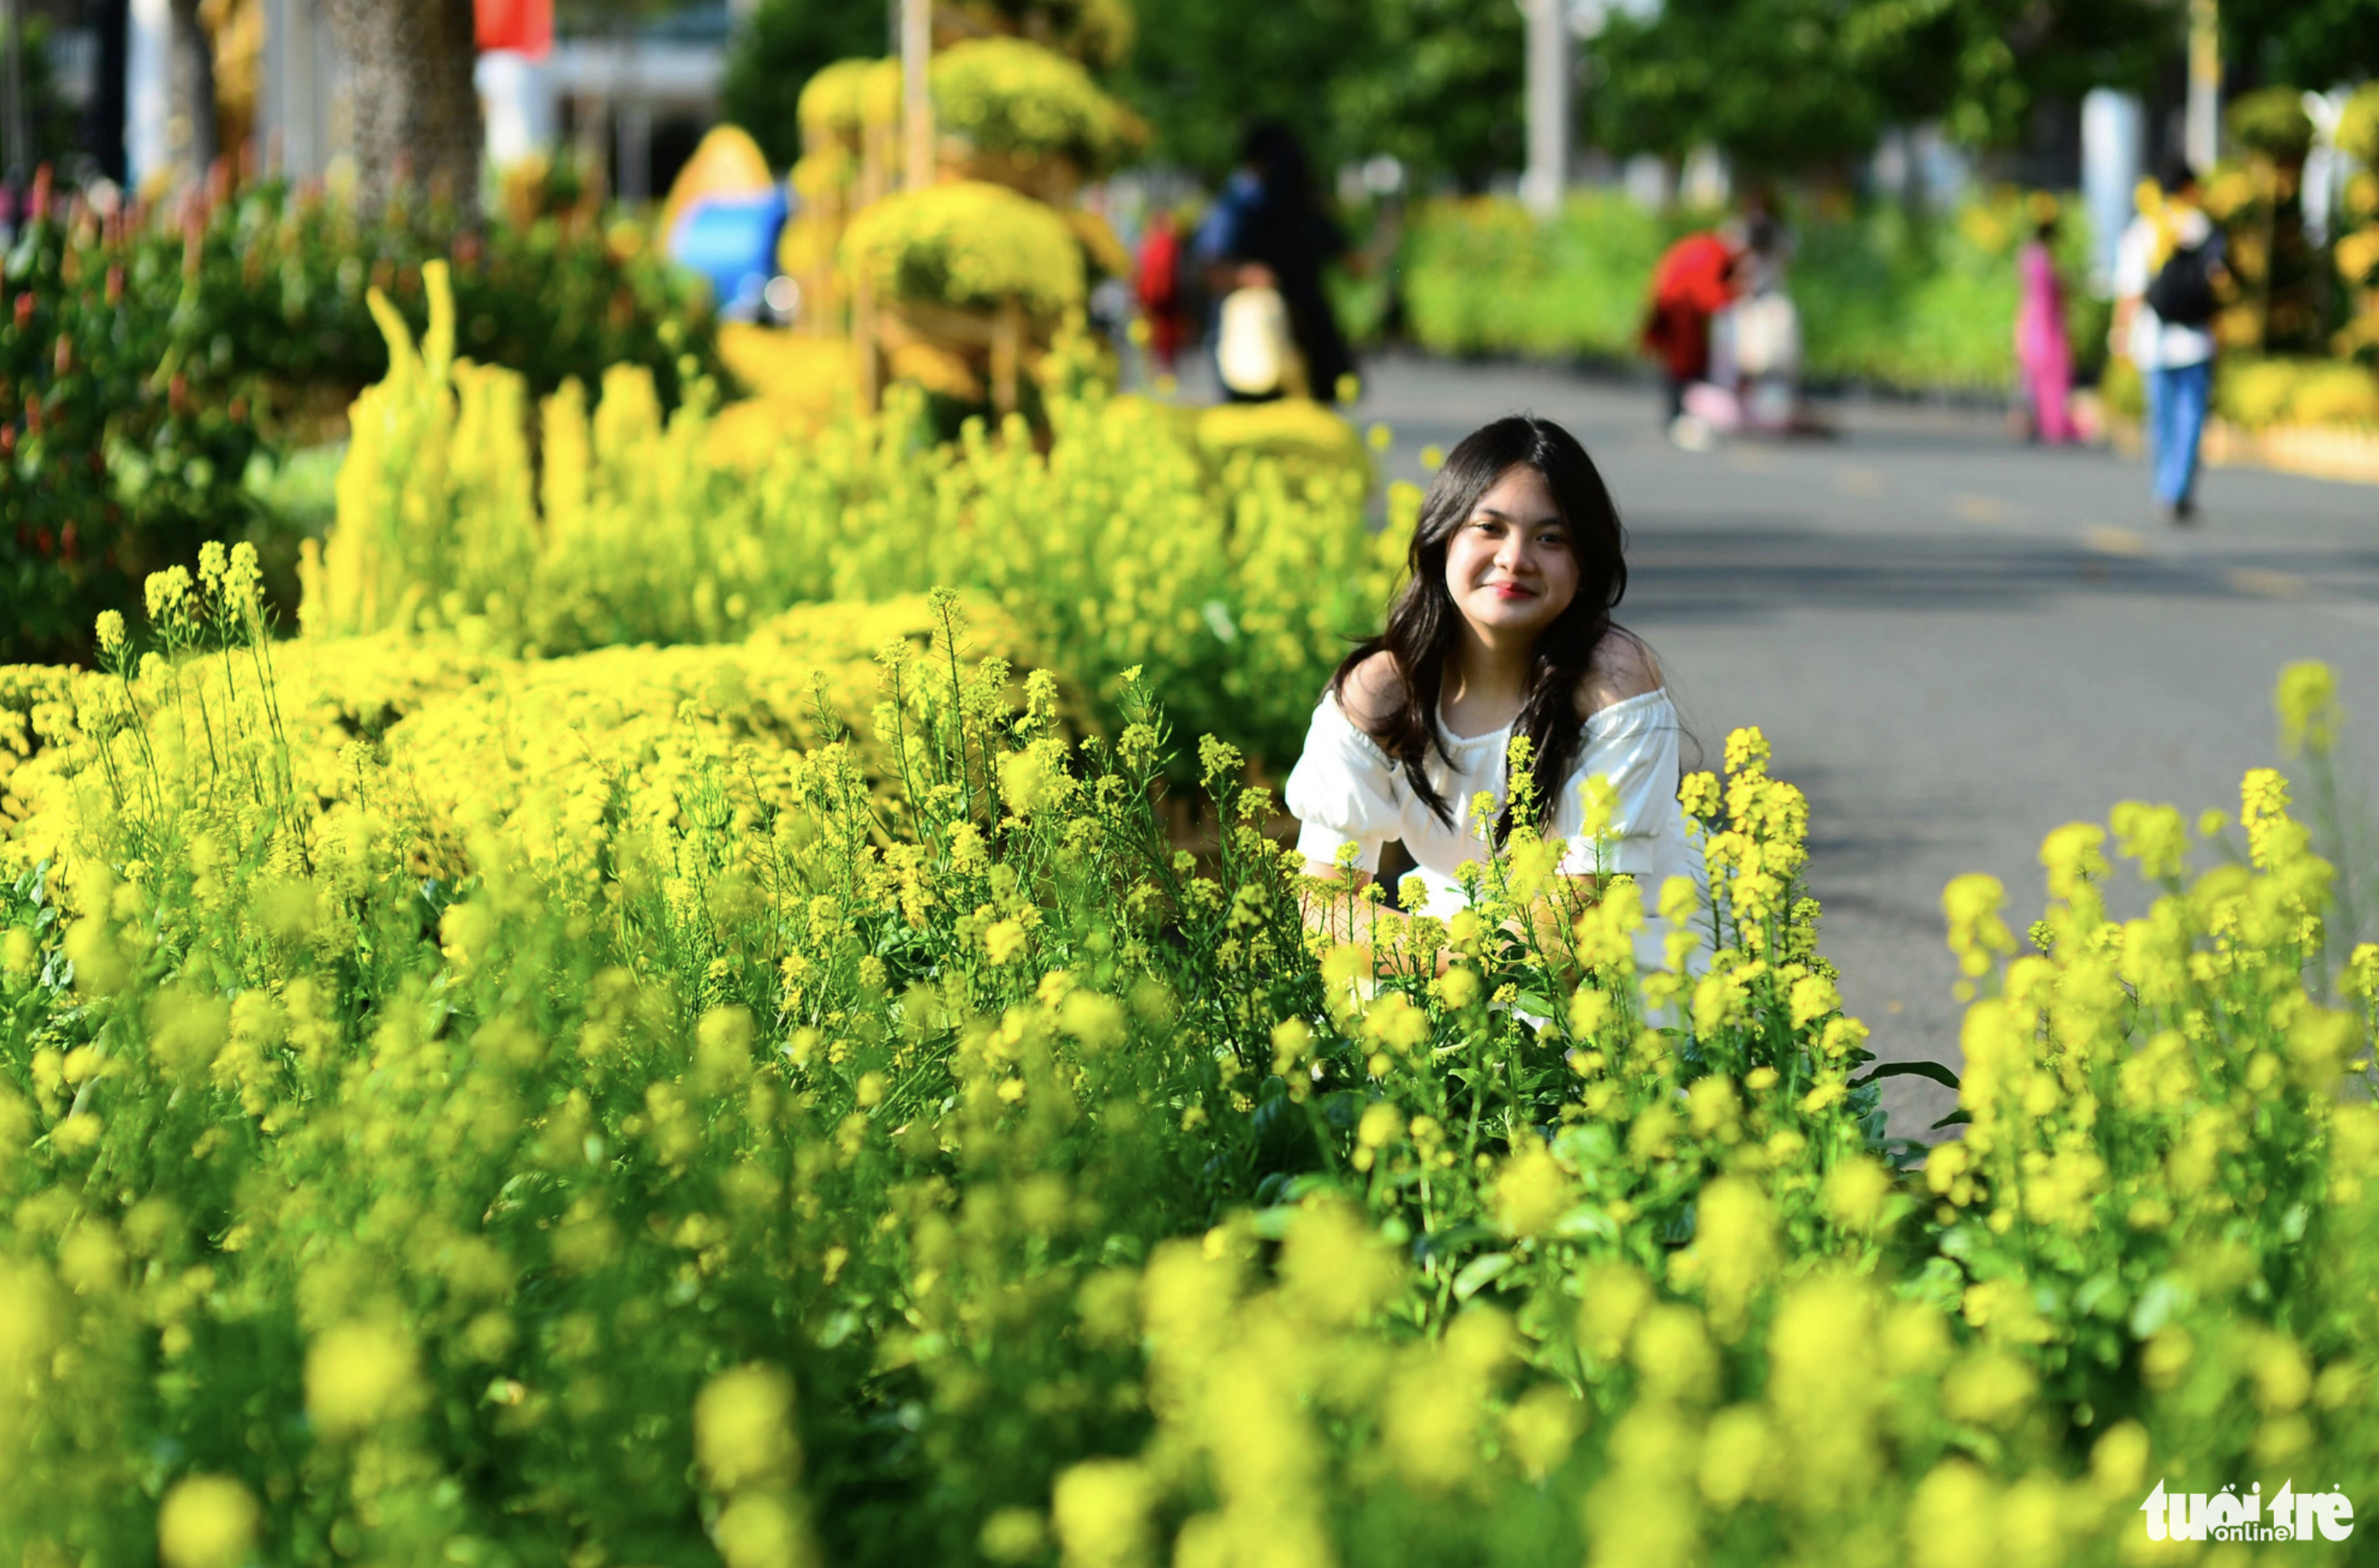 Phu My Hung Flower Street in District 7, Ho Chi Minh City is adorned with yellow flowers. Photo: Quang Dinh / Tuoi Tre